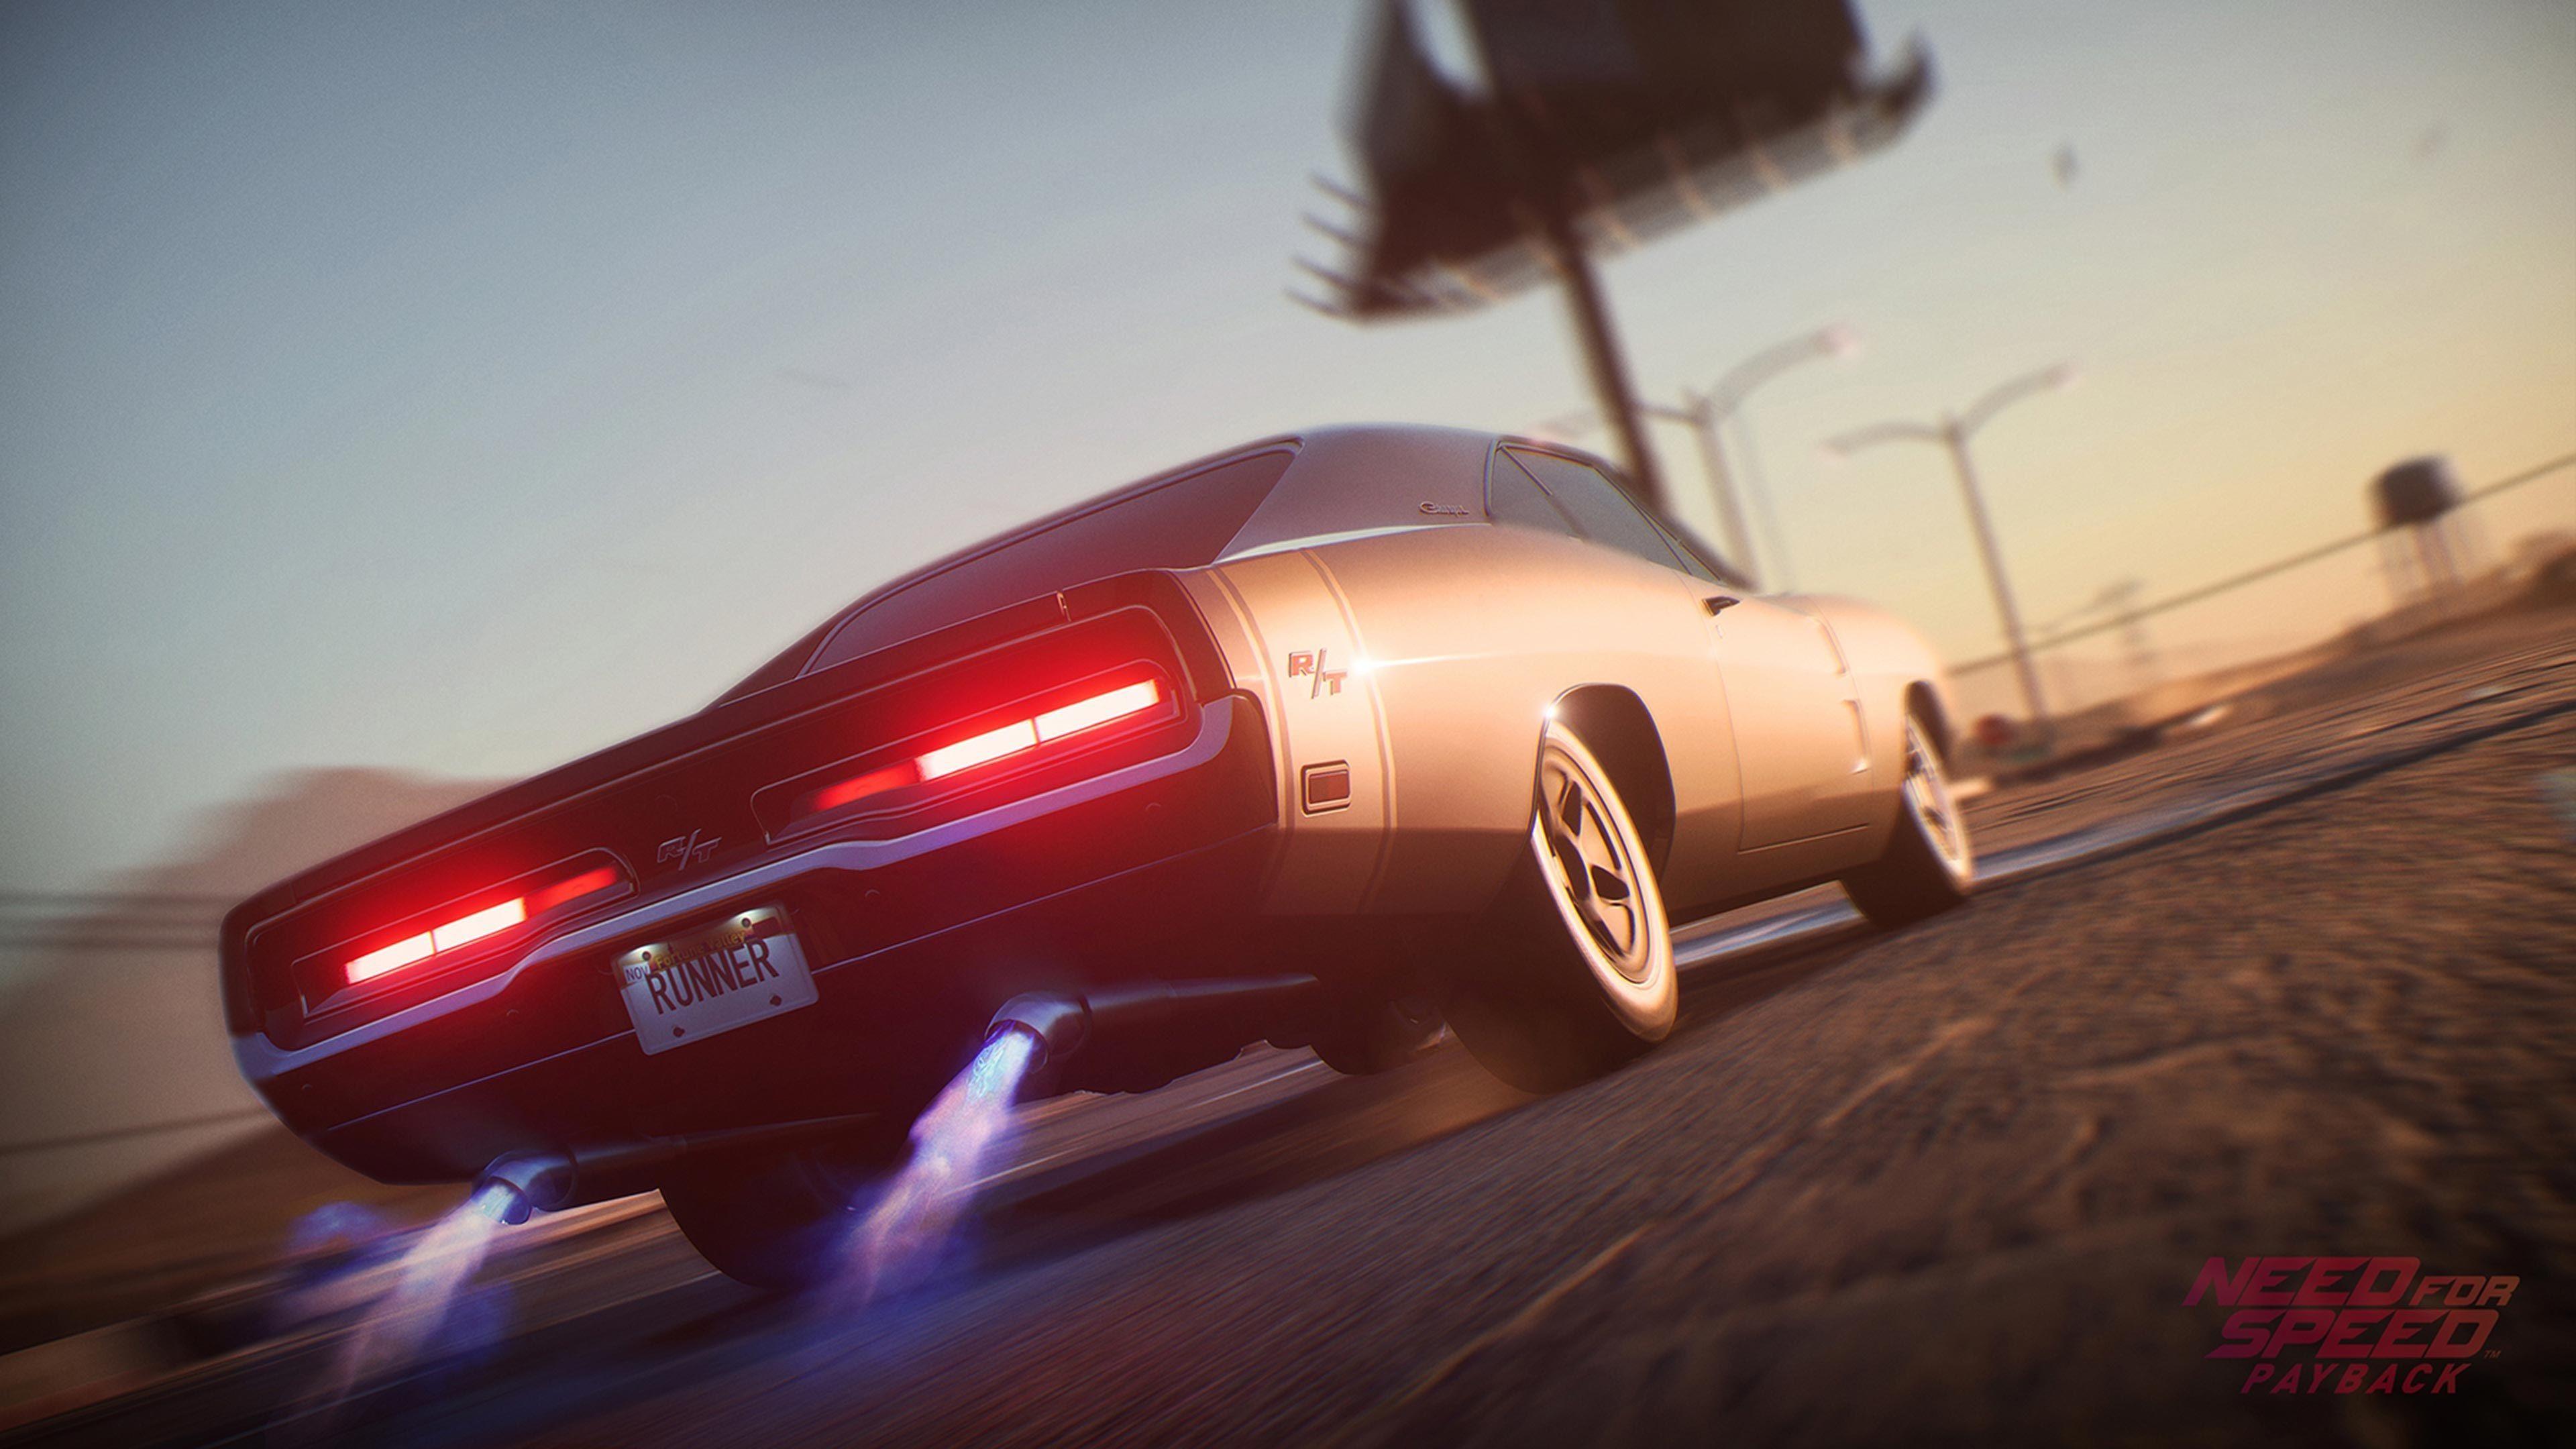 need for speed payback 4k free full HD wallpaper. Need